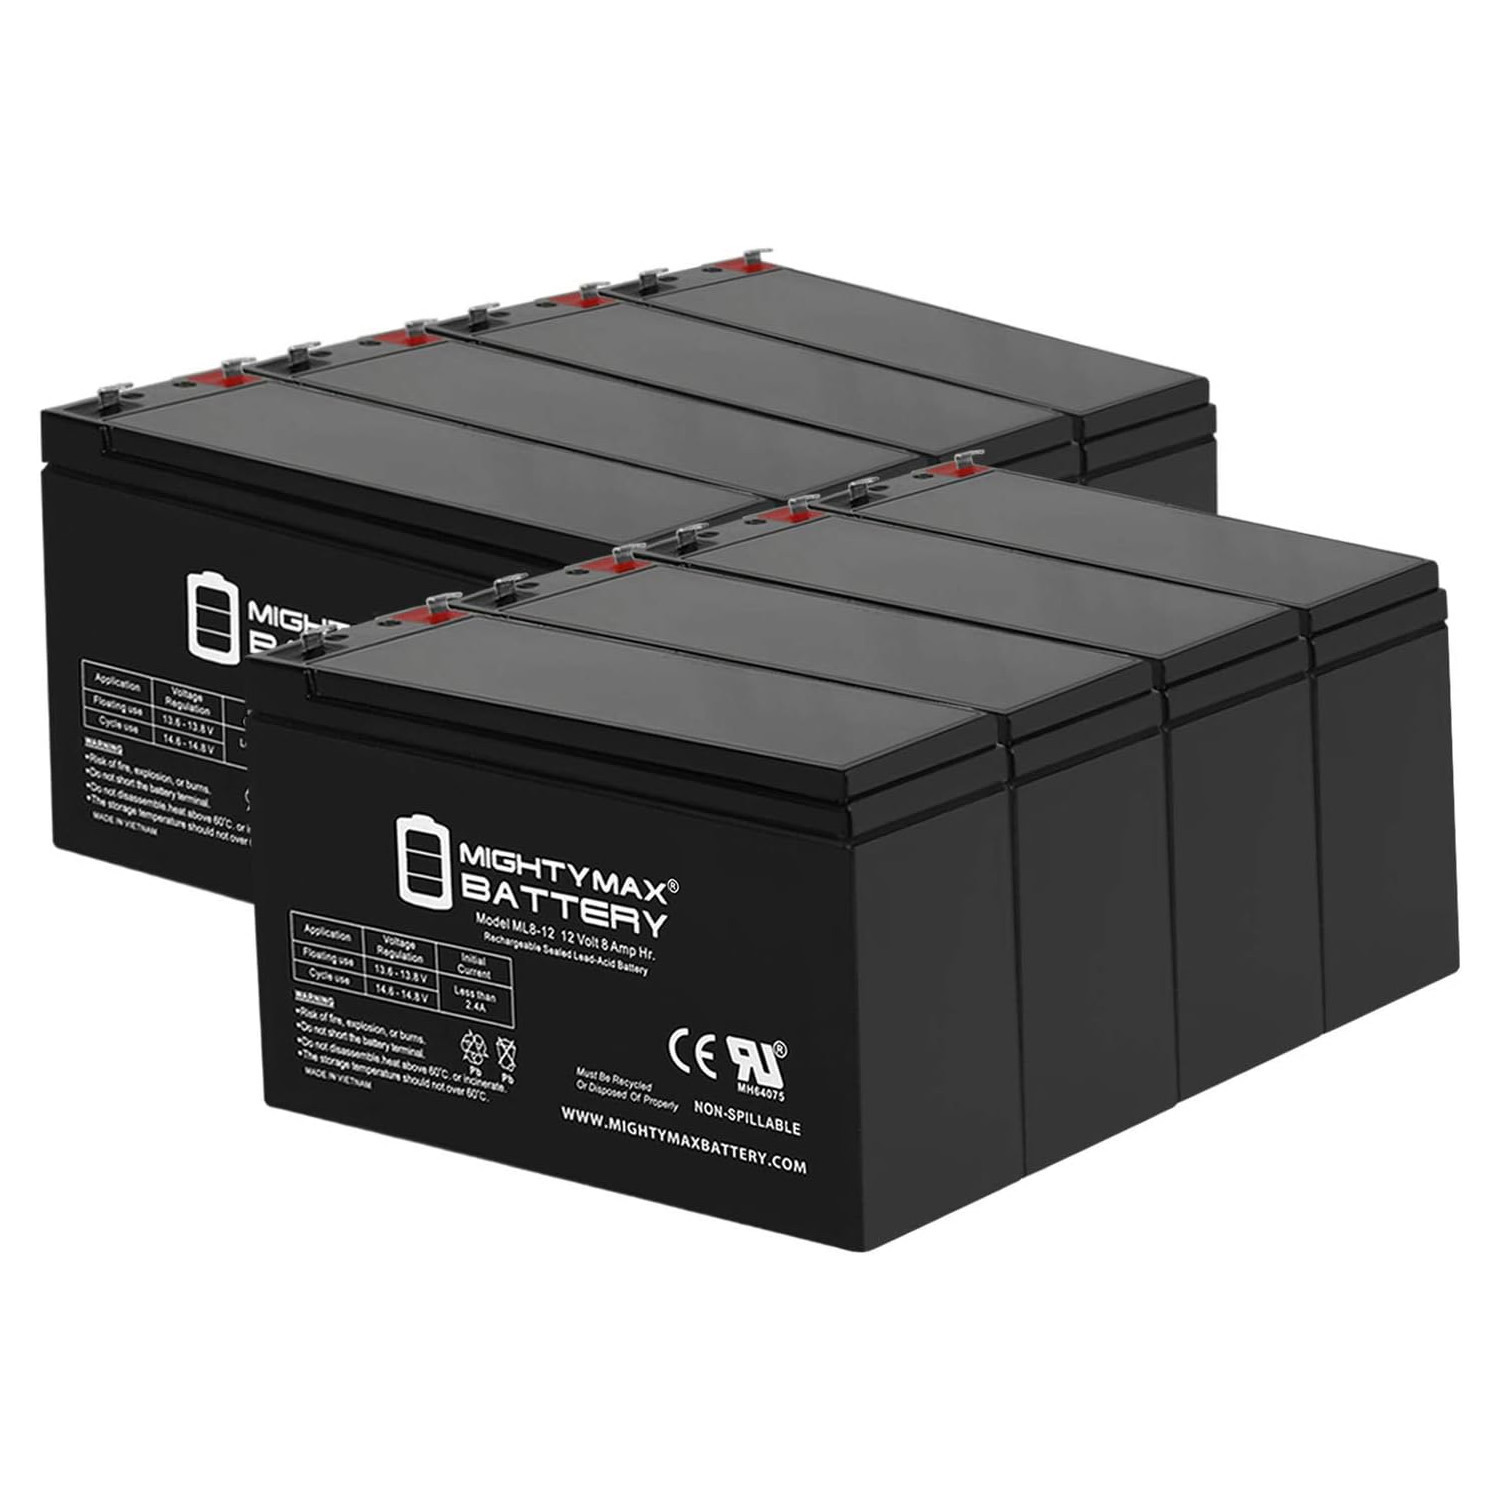 12V 8Ah Battery Replacement for APC SmartUPS RM 1500 2U - 8 Pack